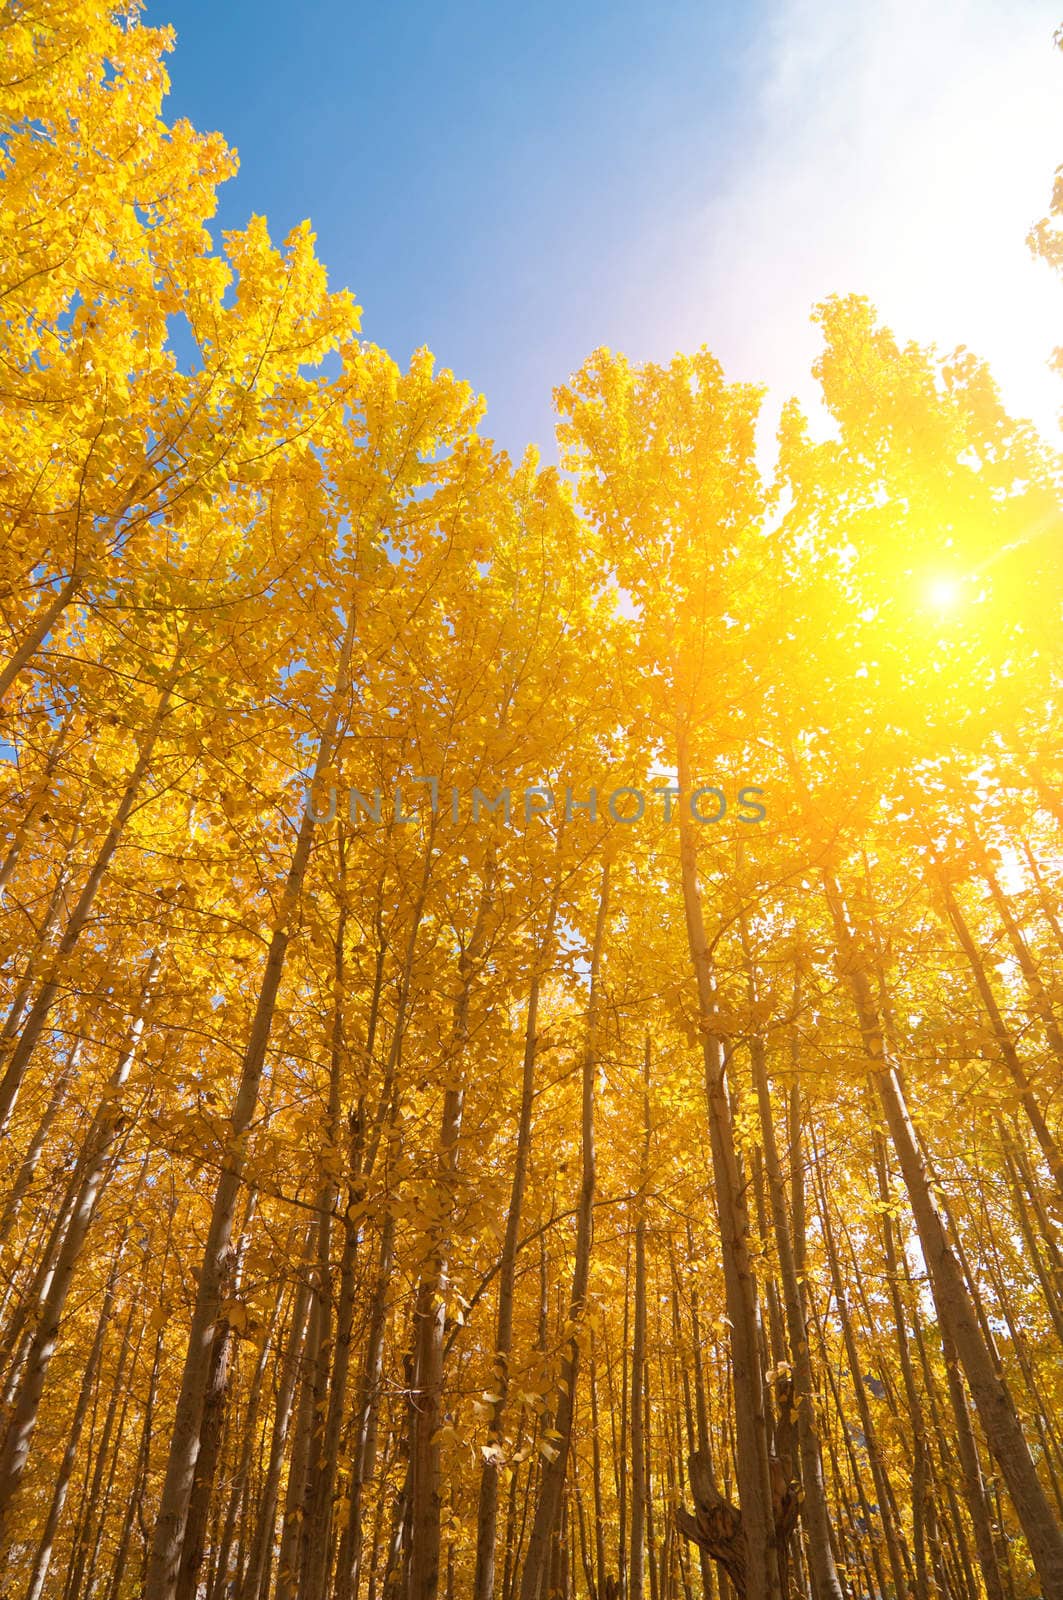 Fall Aspen Trees with filtered sunlight , Leh District in the state of Jammu and Kashmir, India.